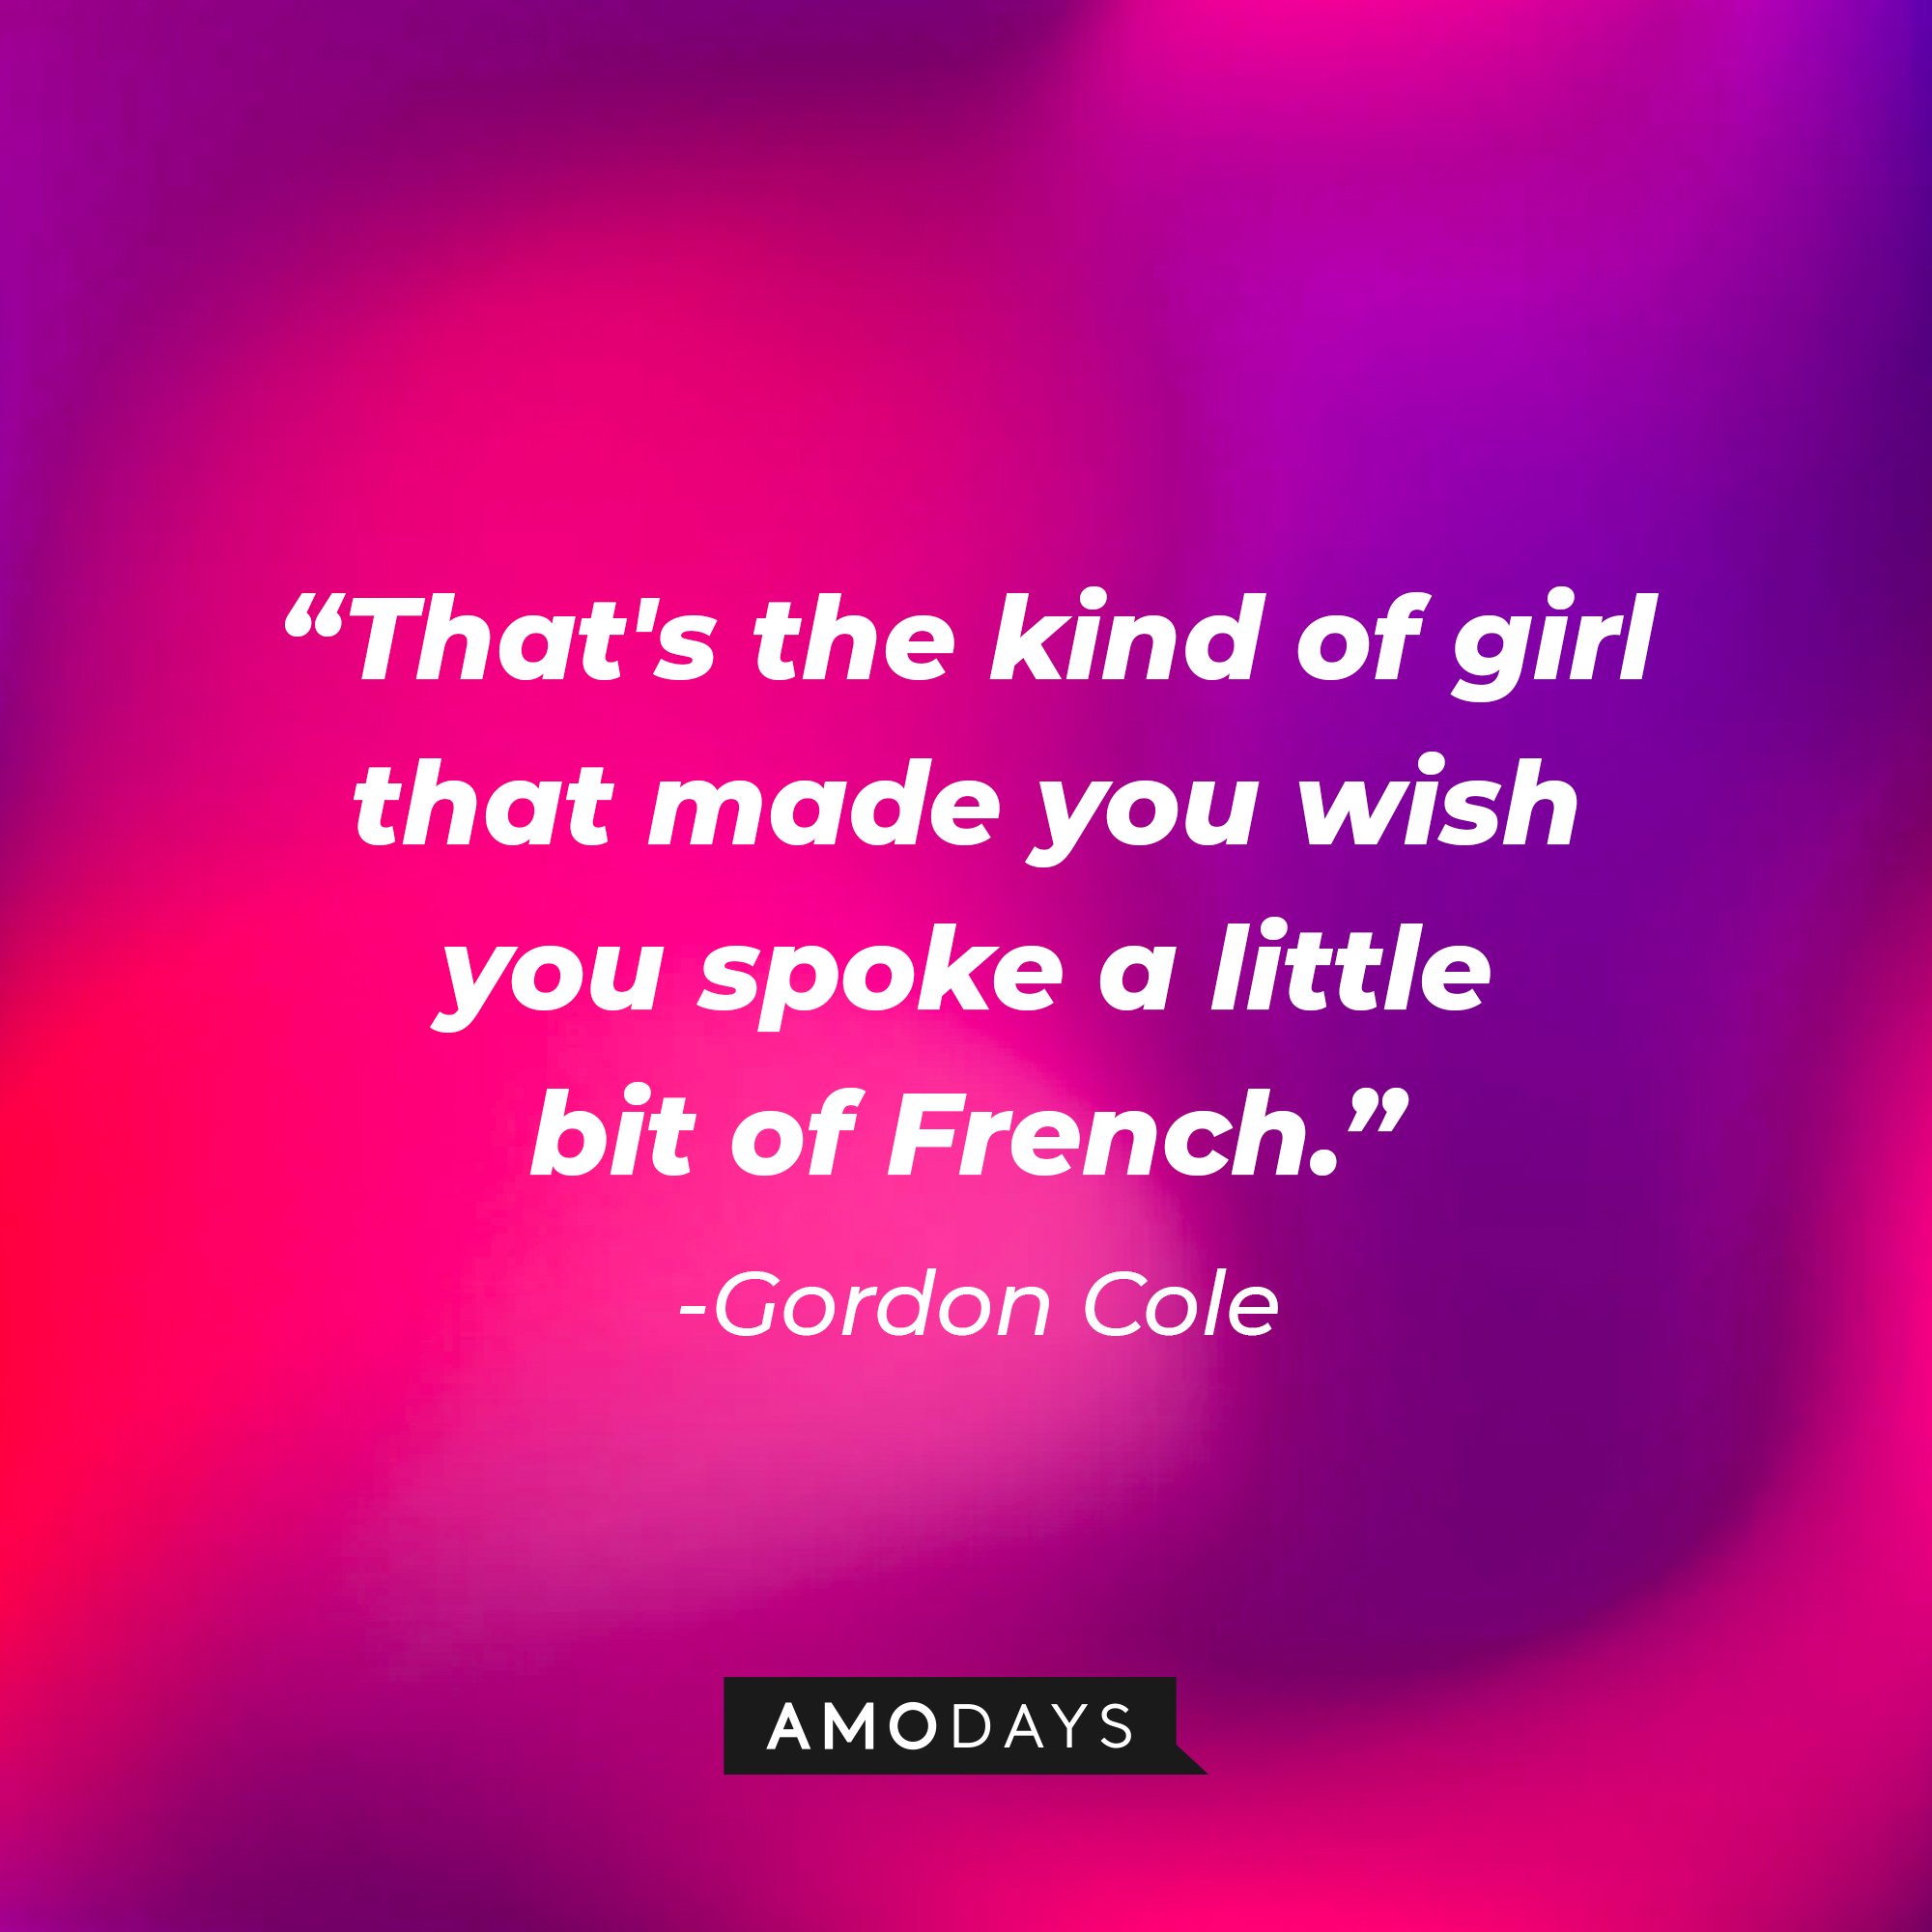 Gordon Cole’s quote: "That's the kind of girl that made you wish you spoke a little bit of French."  | Image: AmoDays